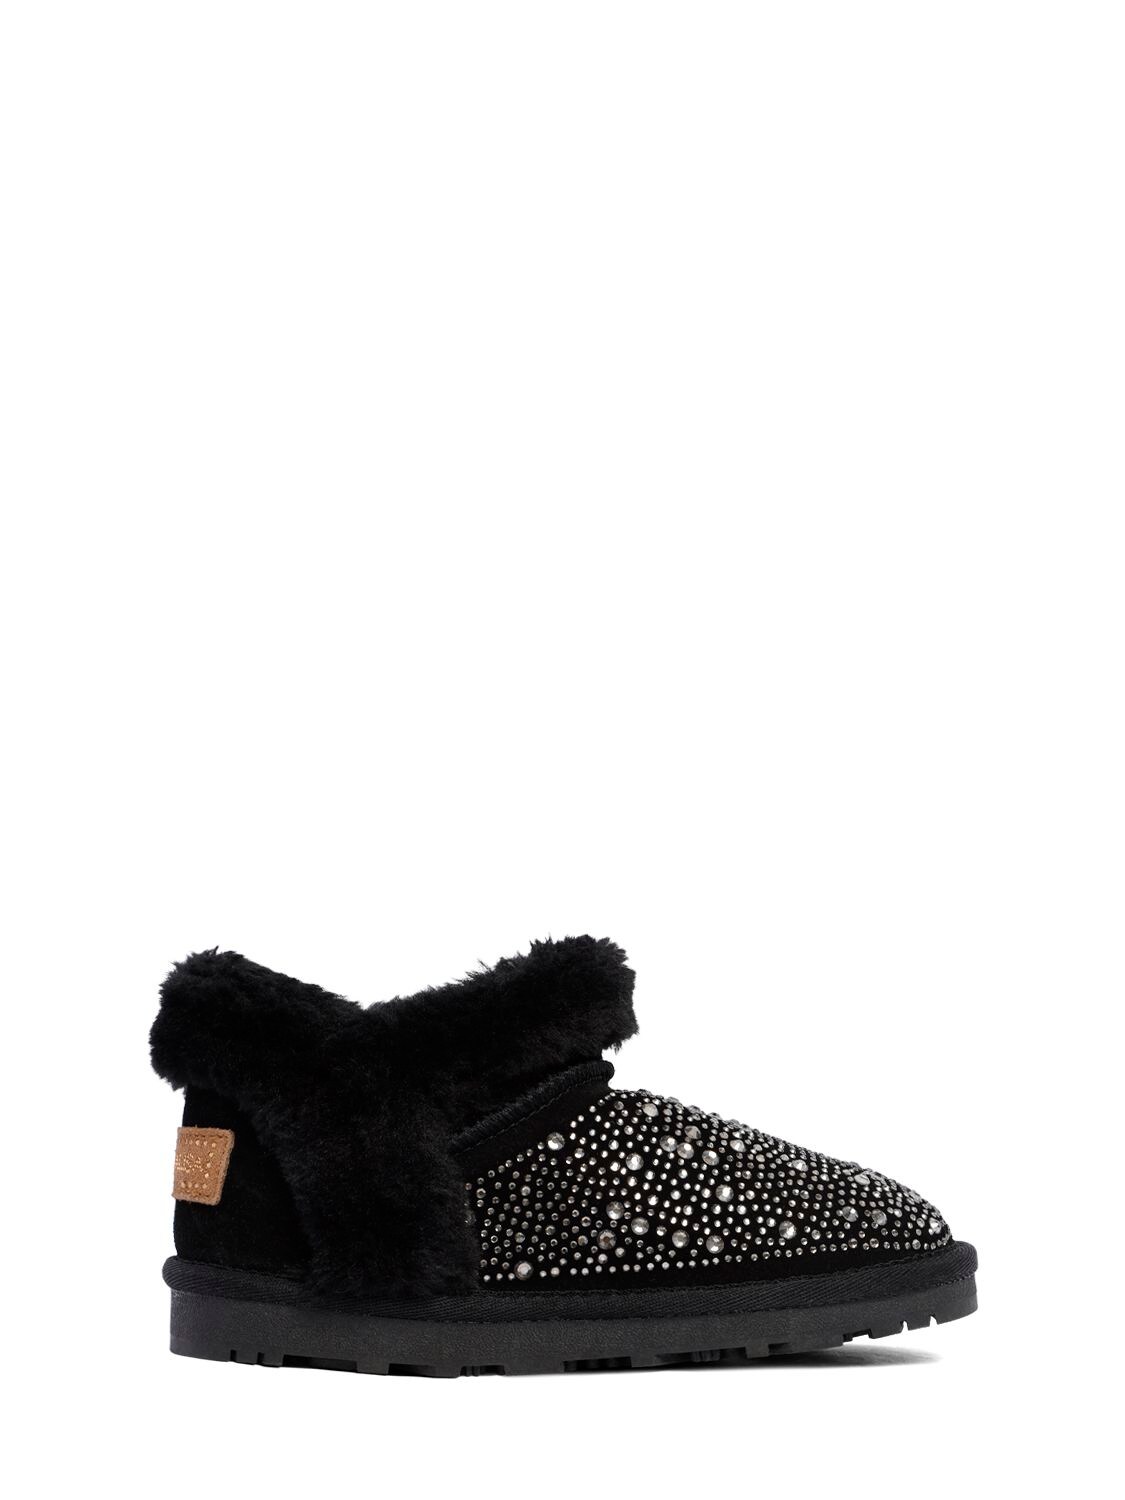 MONNALISA EMBELLISHED ANKLE BOOTS W/ FAUX FUR